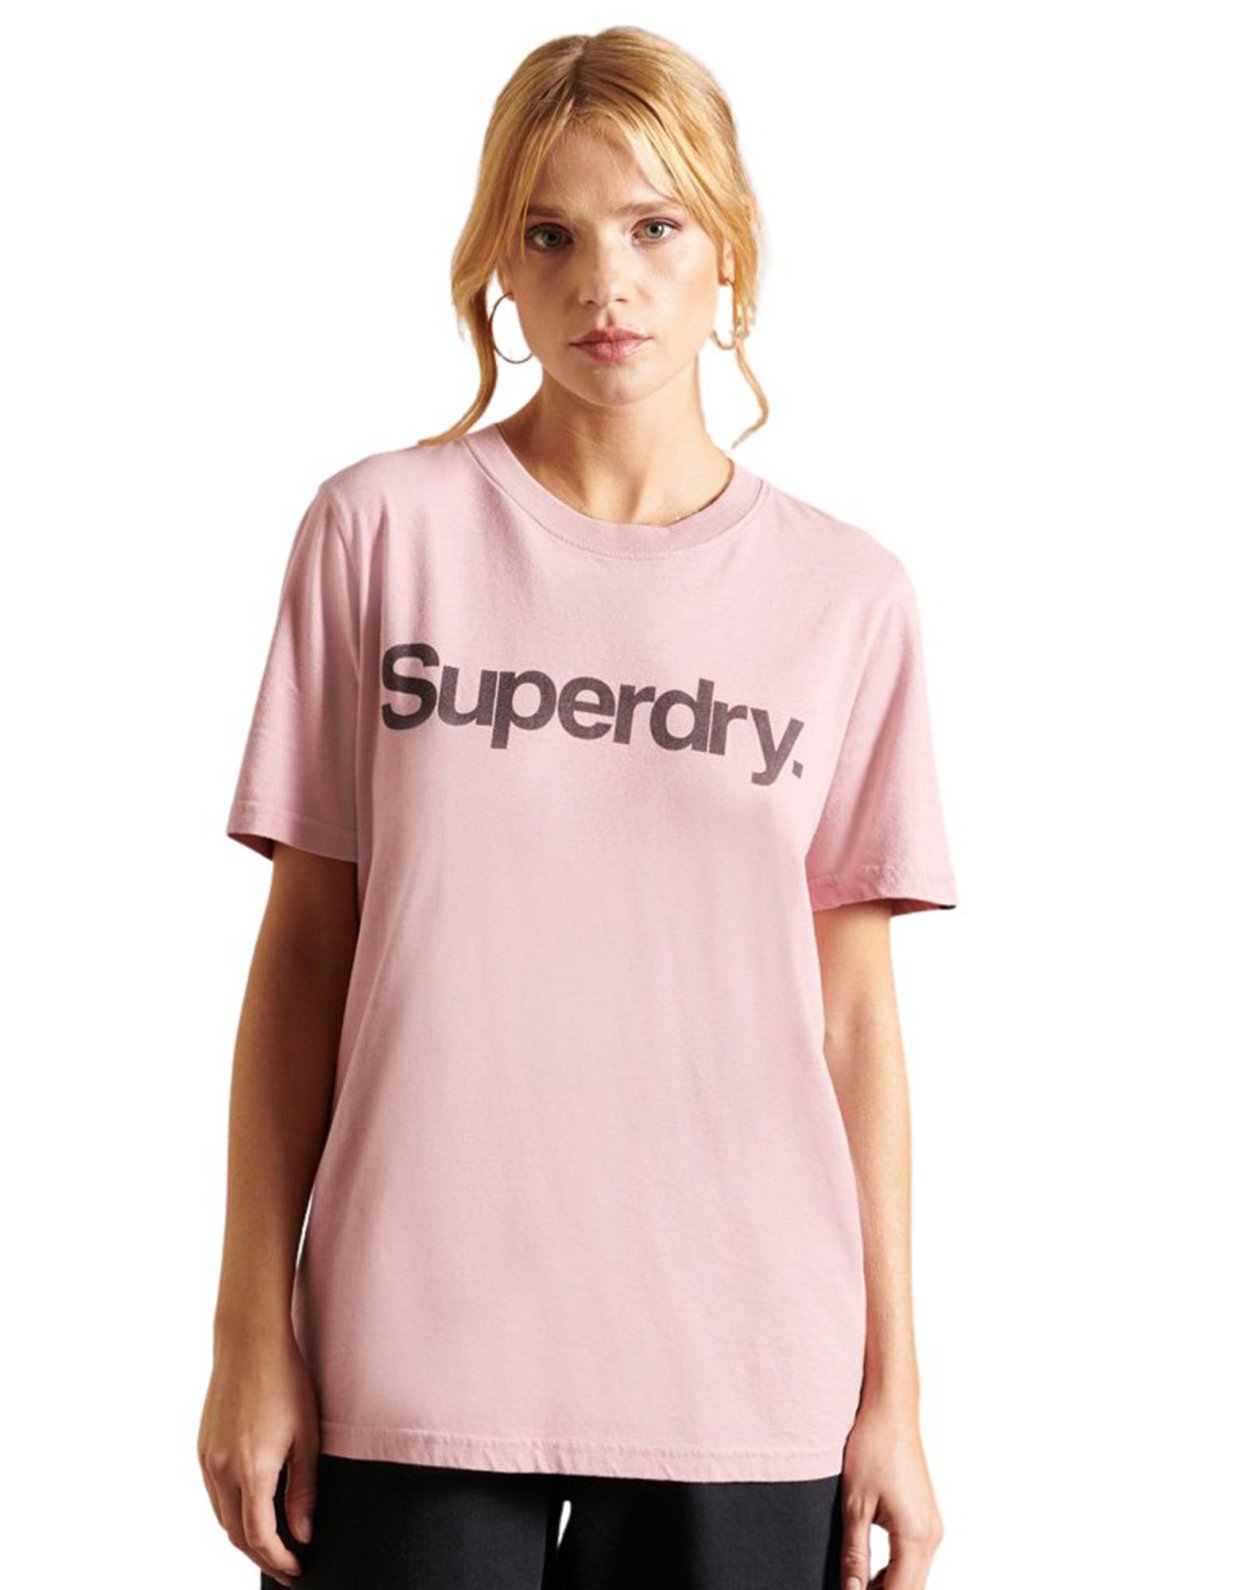 Superdry Classic tee soft pink